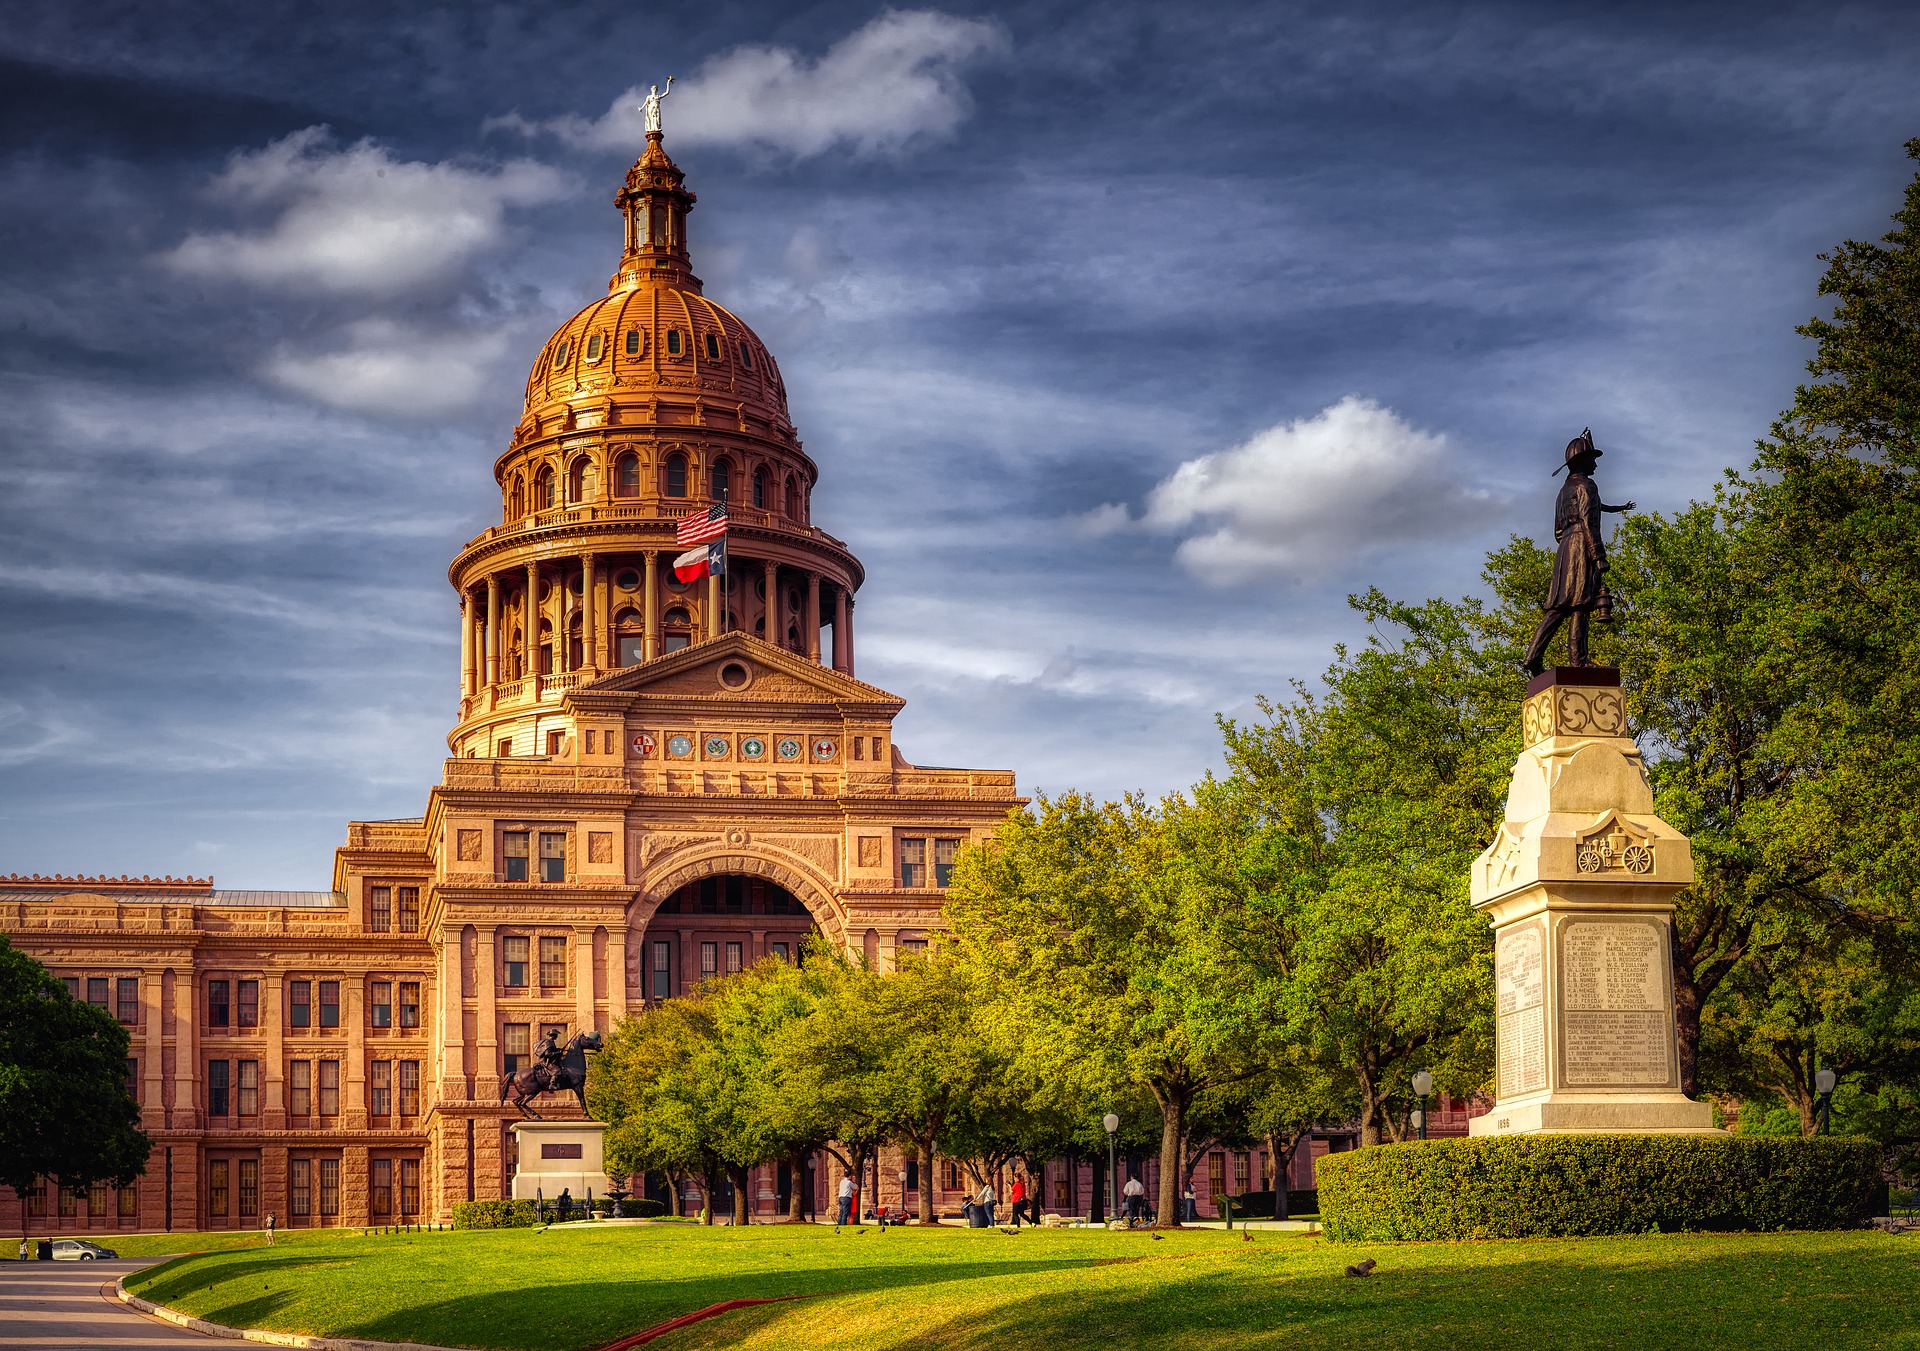 Representative Files Bill for Lone Star State Independence